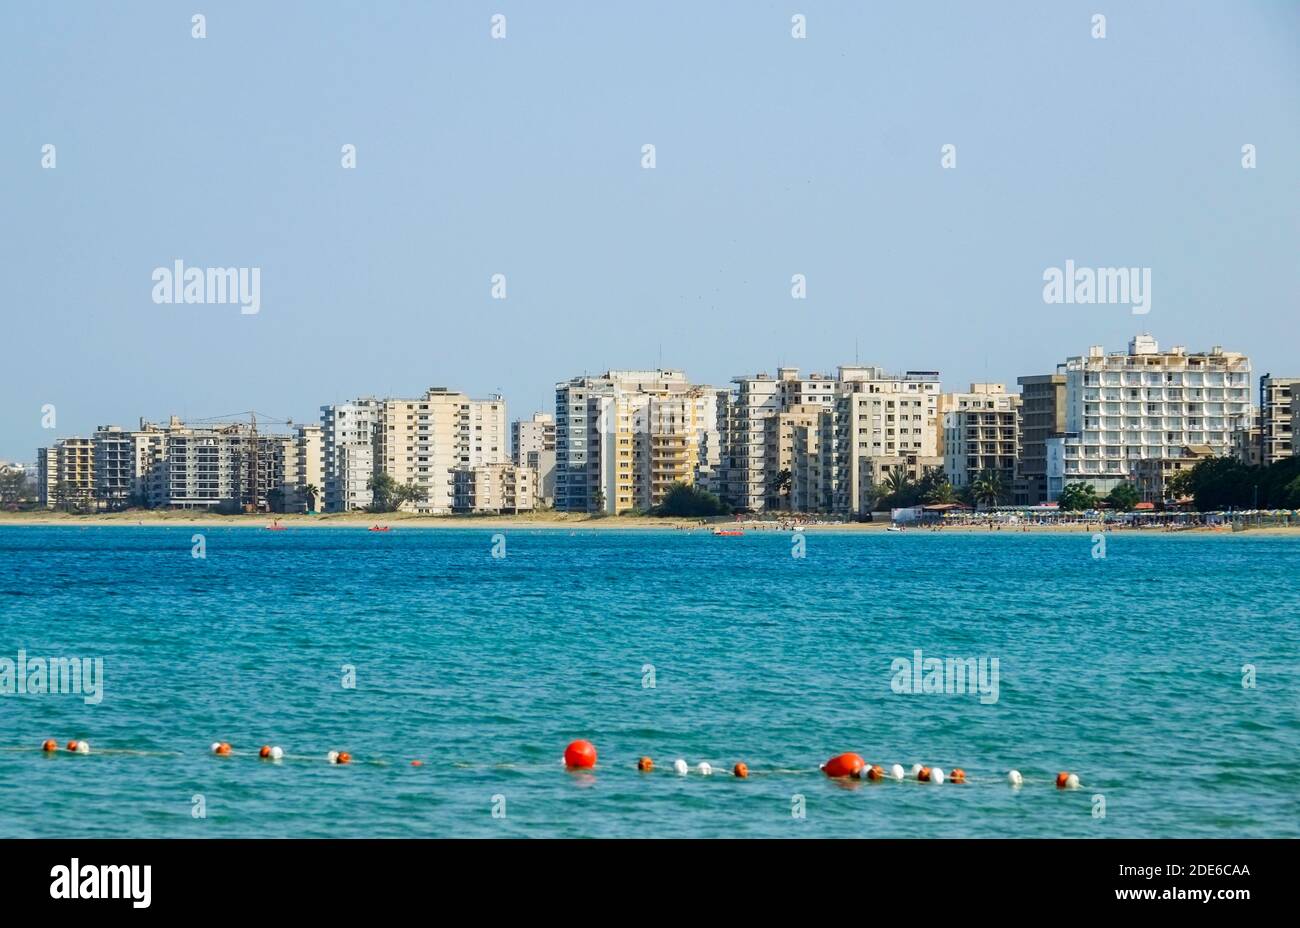 Cyprus. Varosha, Famagusta.The former holiday resort was abandoned in 1974 and is now part of Turkish occupied Northern Cyprus, (TRNC). Stock Photo